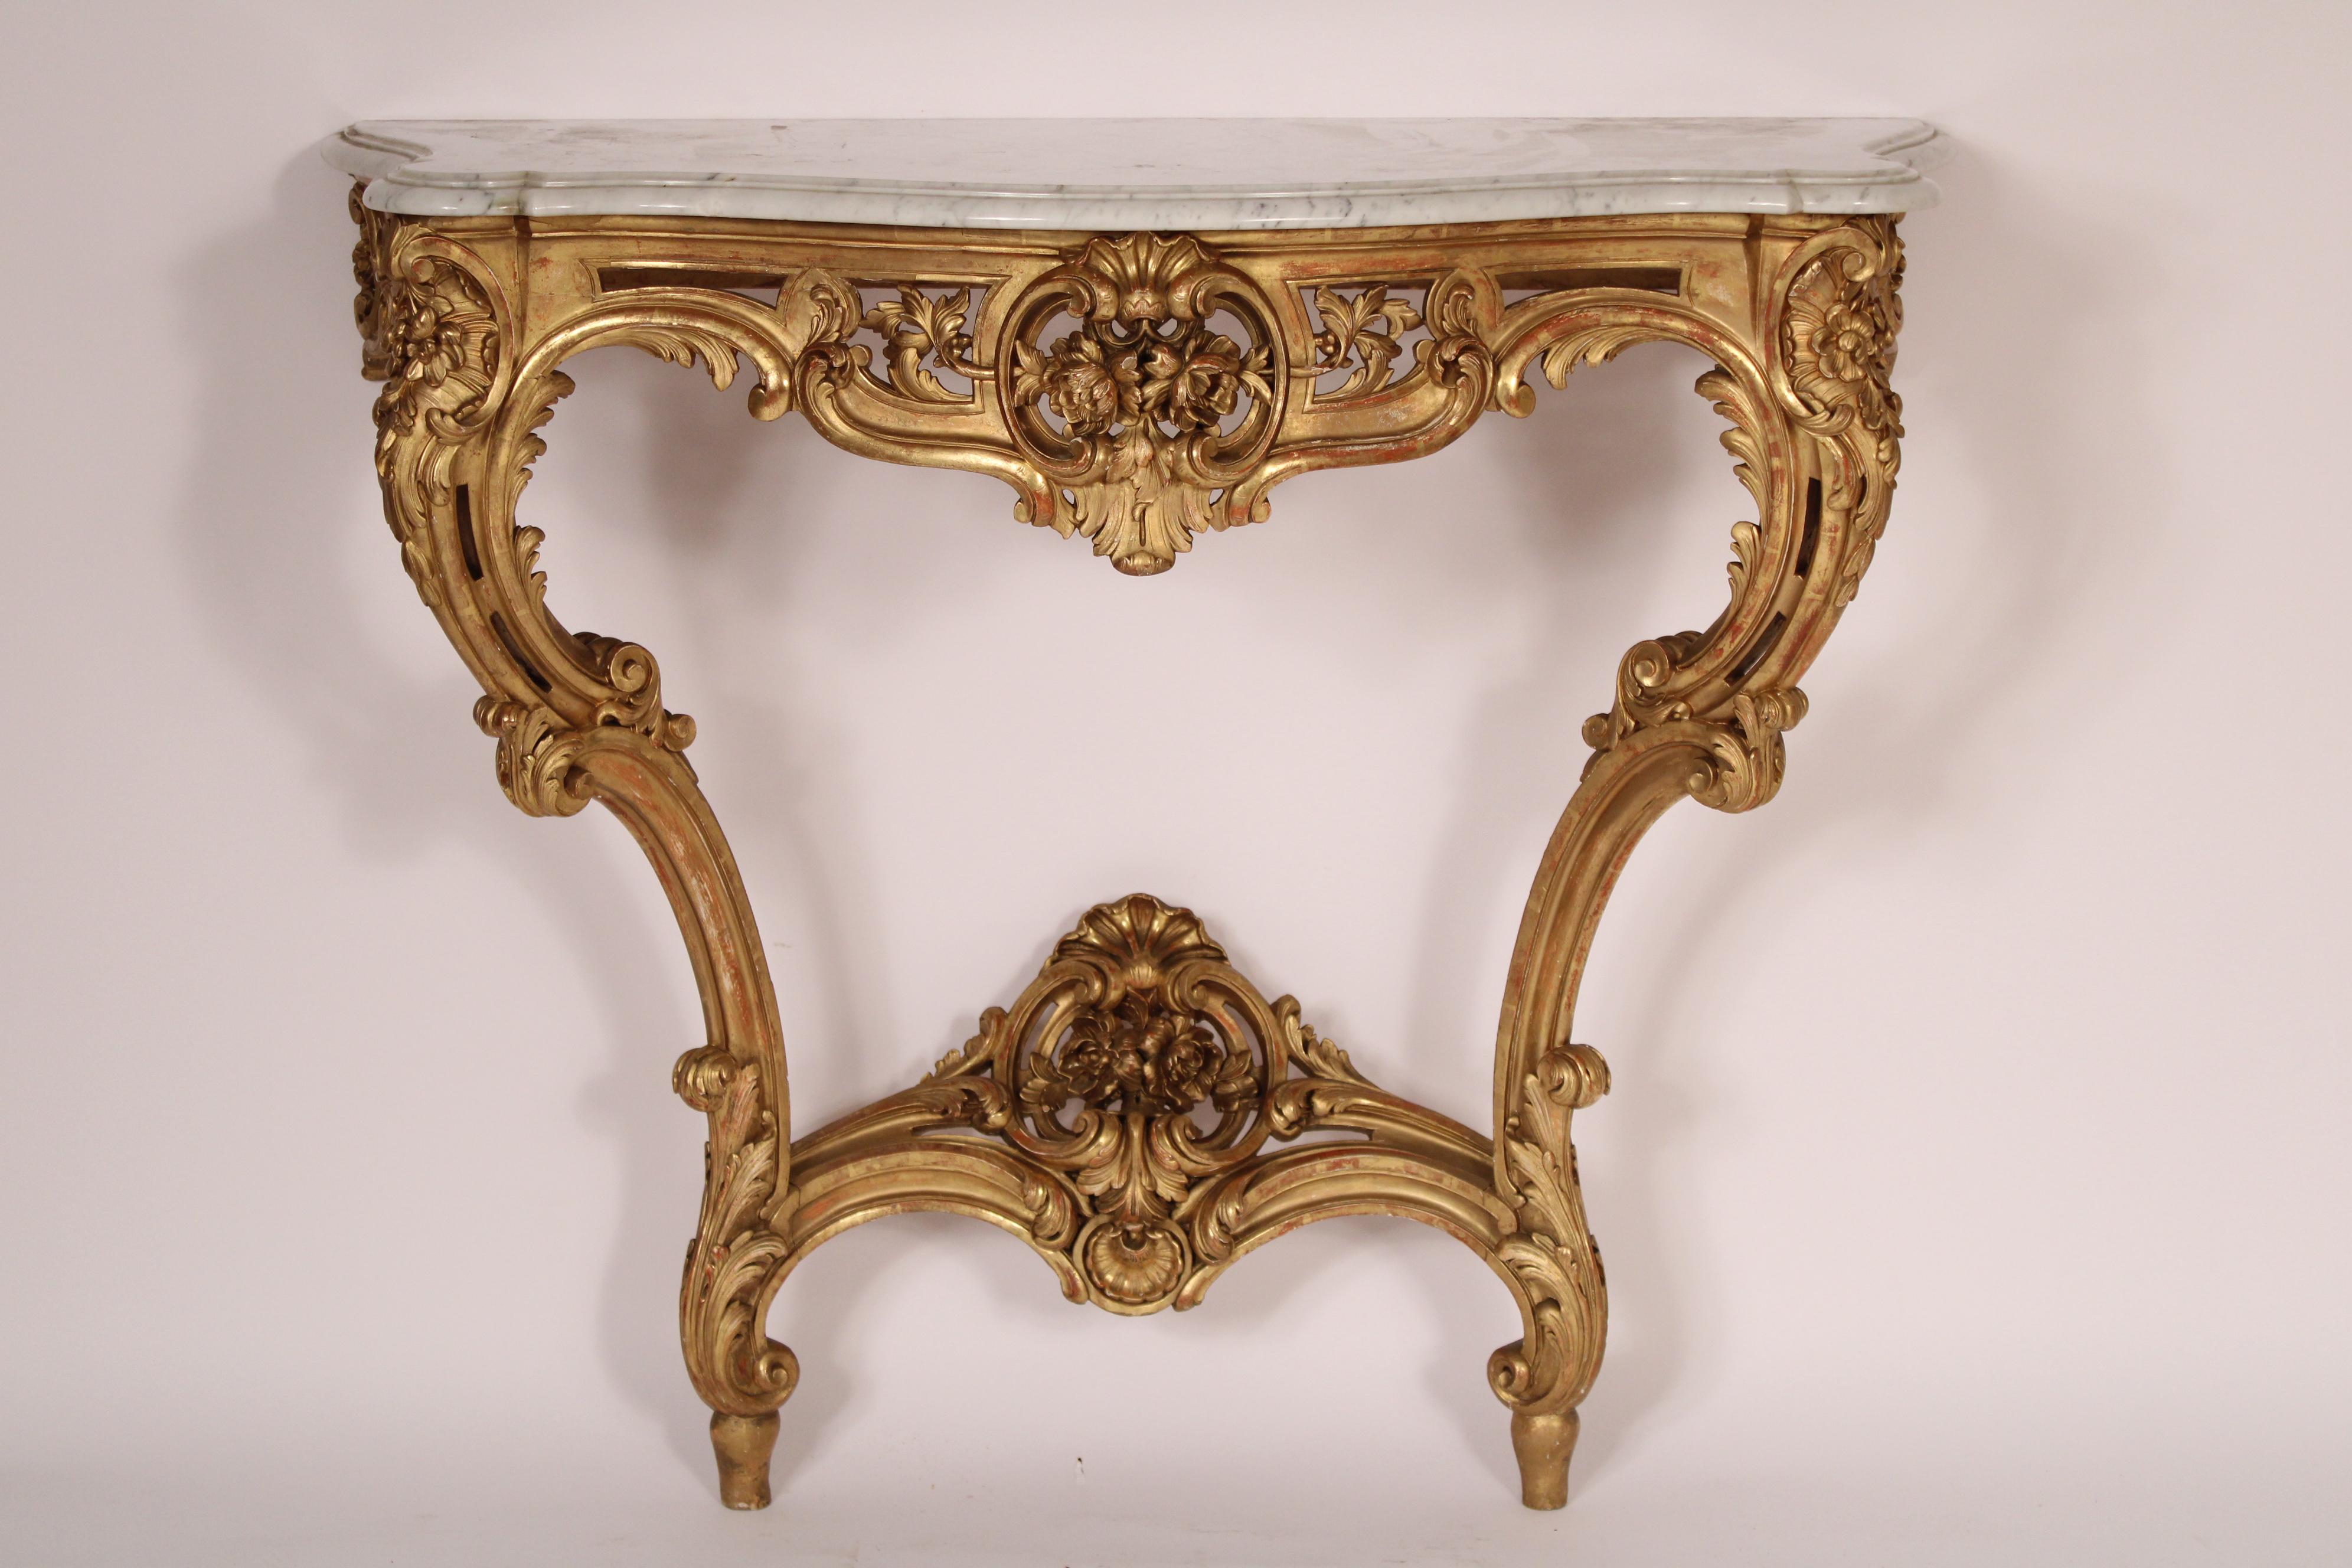 Antique Louis XV style gilt wood (gold Leaf) console table with marble top, circa 1910. With a Carrara marble top with nicely detailed front and side edges, foliate carved frieze, cabriole legs and stretcher bar. 